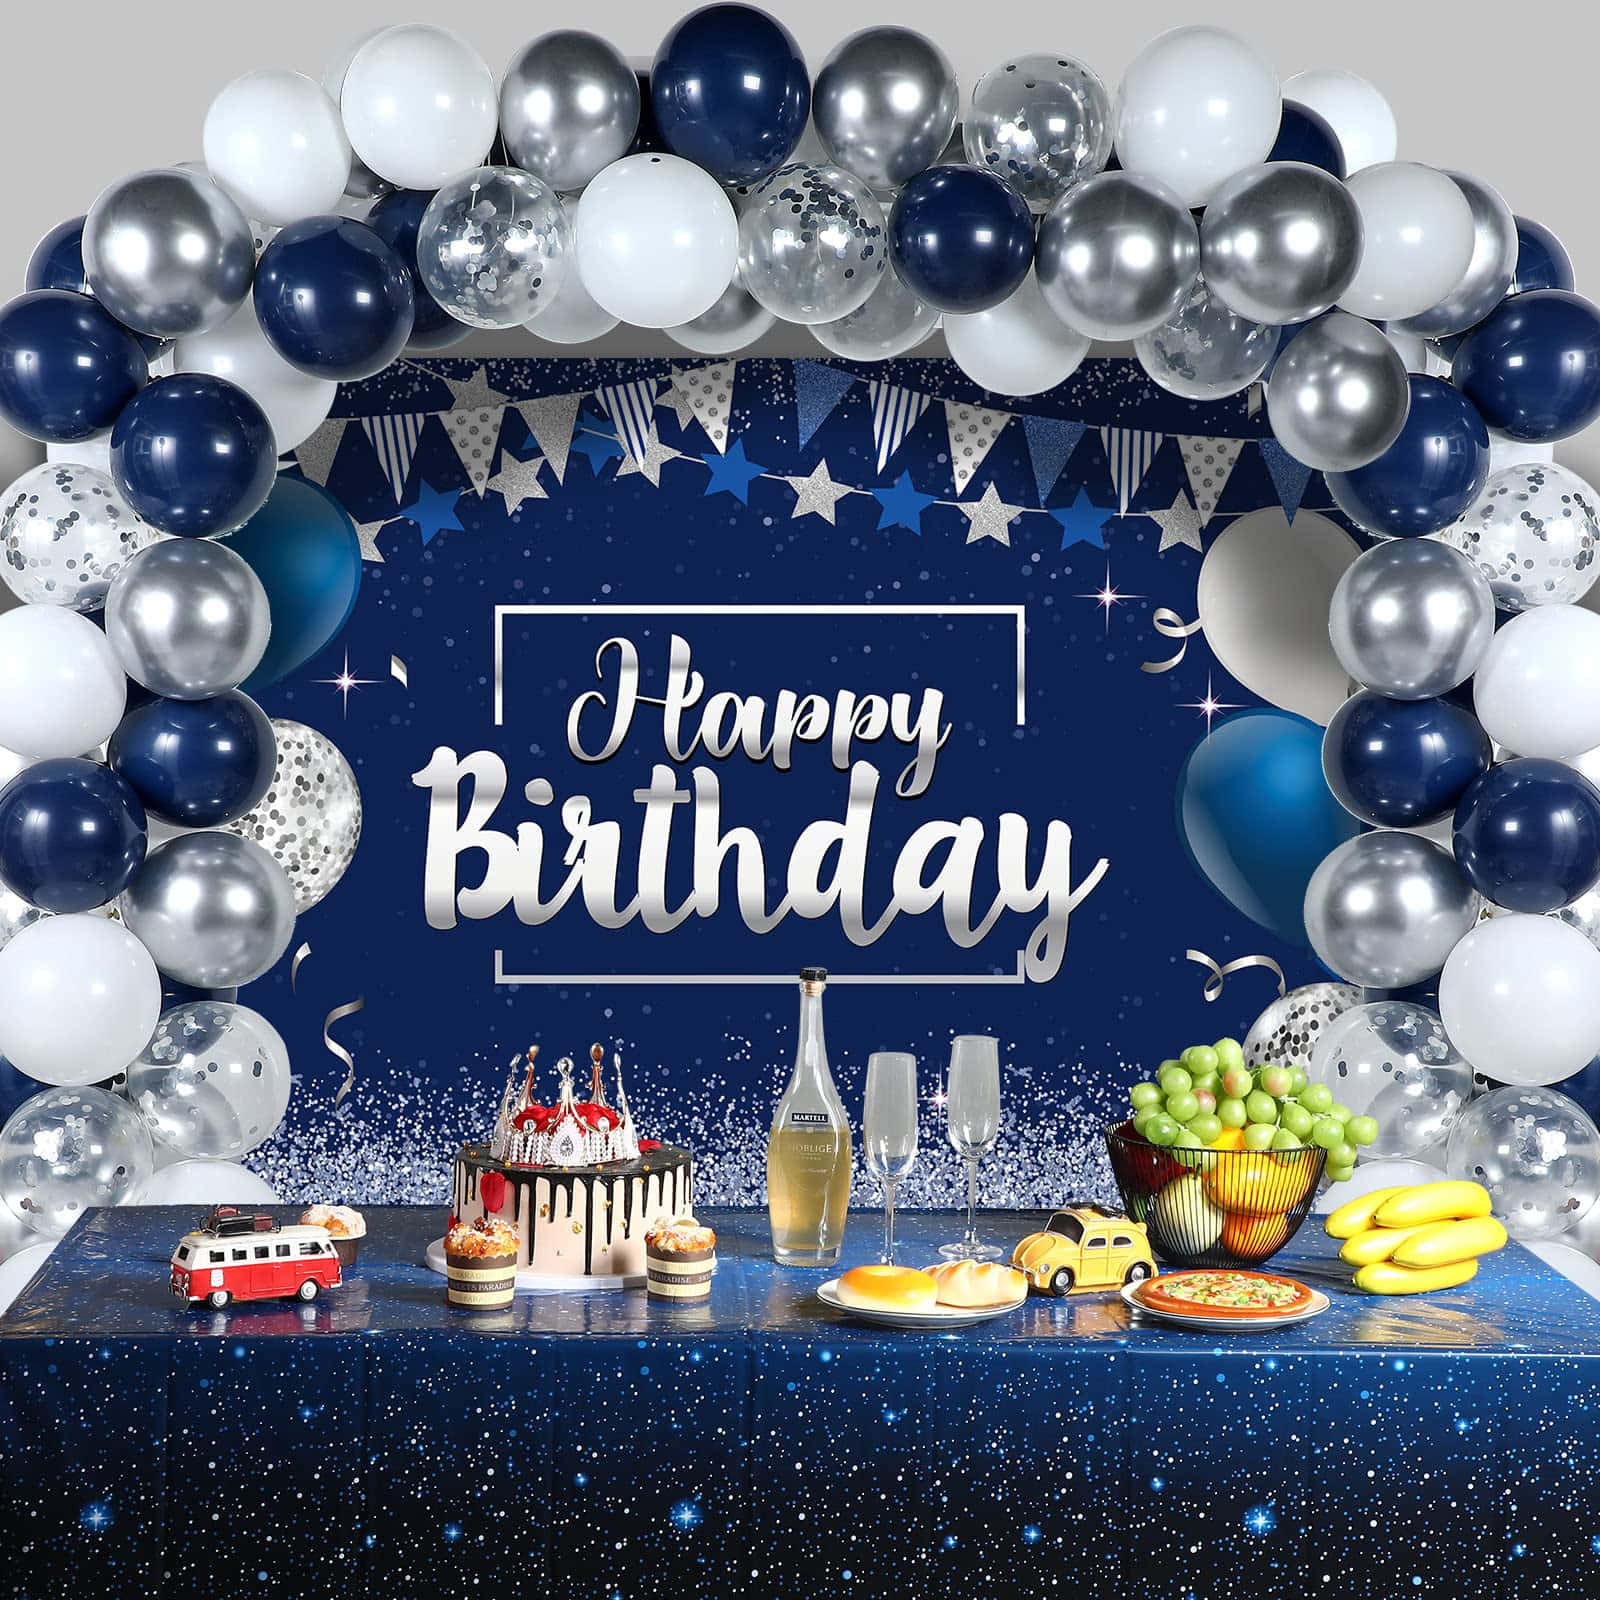 Image  Colorful Blue Birthday Background Celebrating Special Occasions